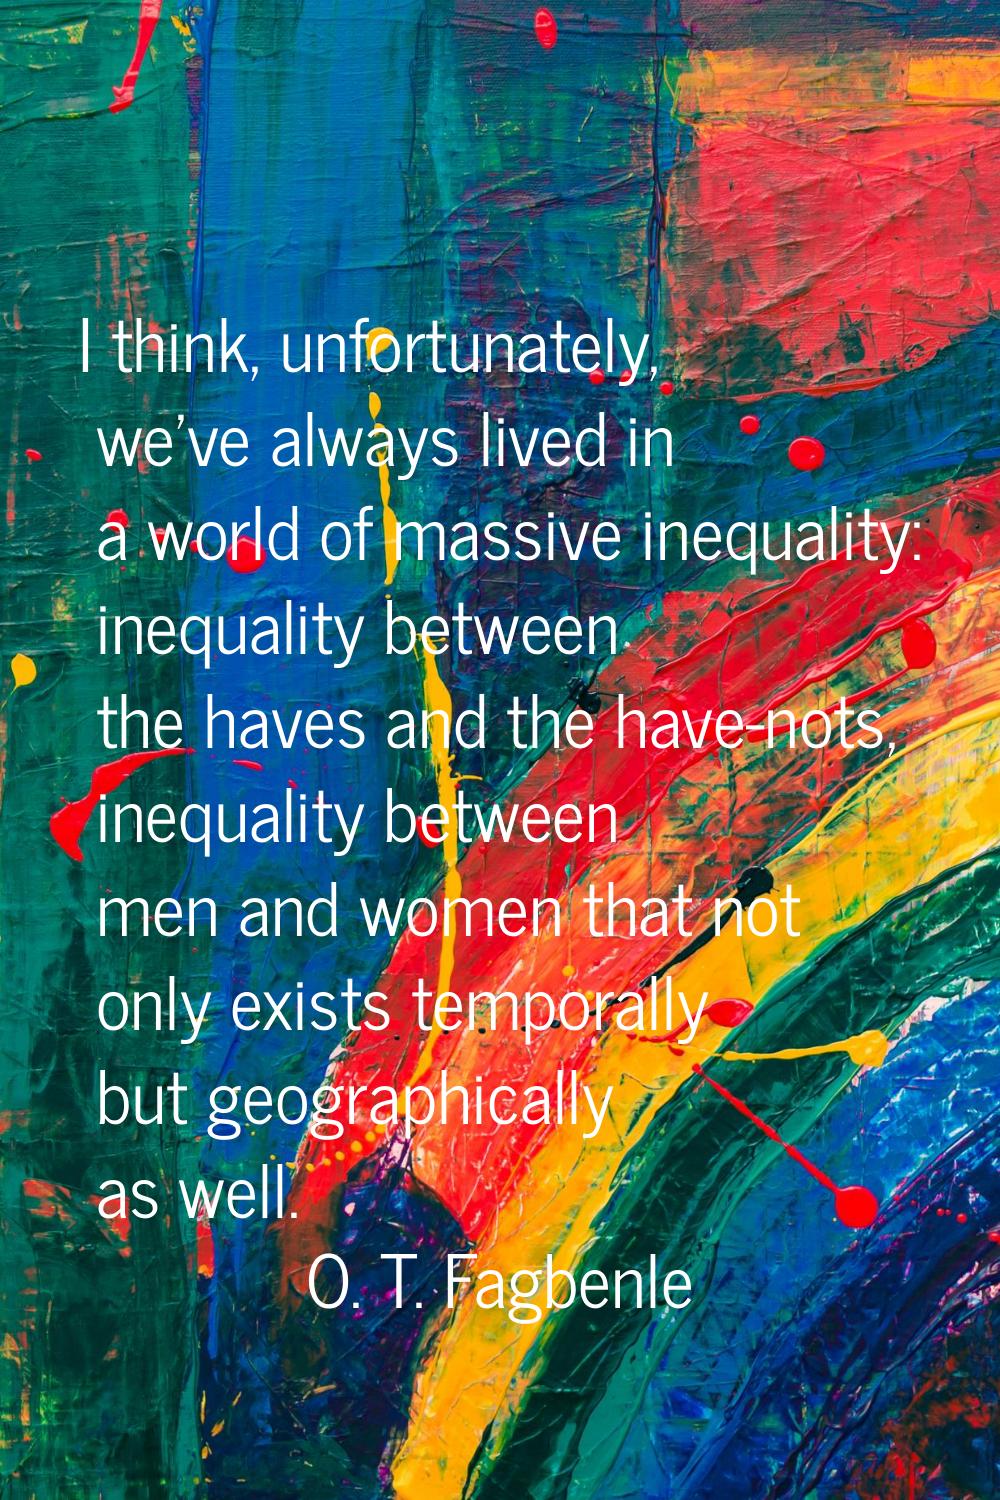 I think, unfortunately, we've always lived in a world of massive inequality: inequality between the